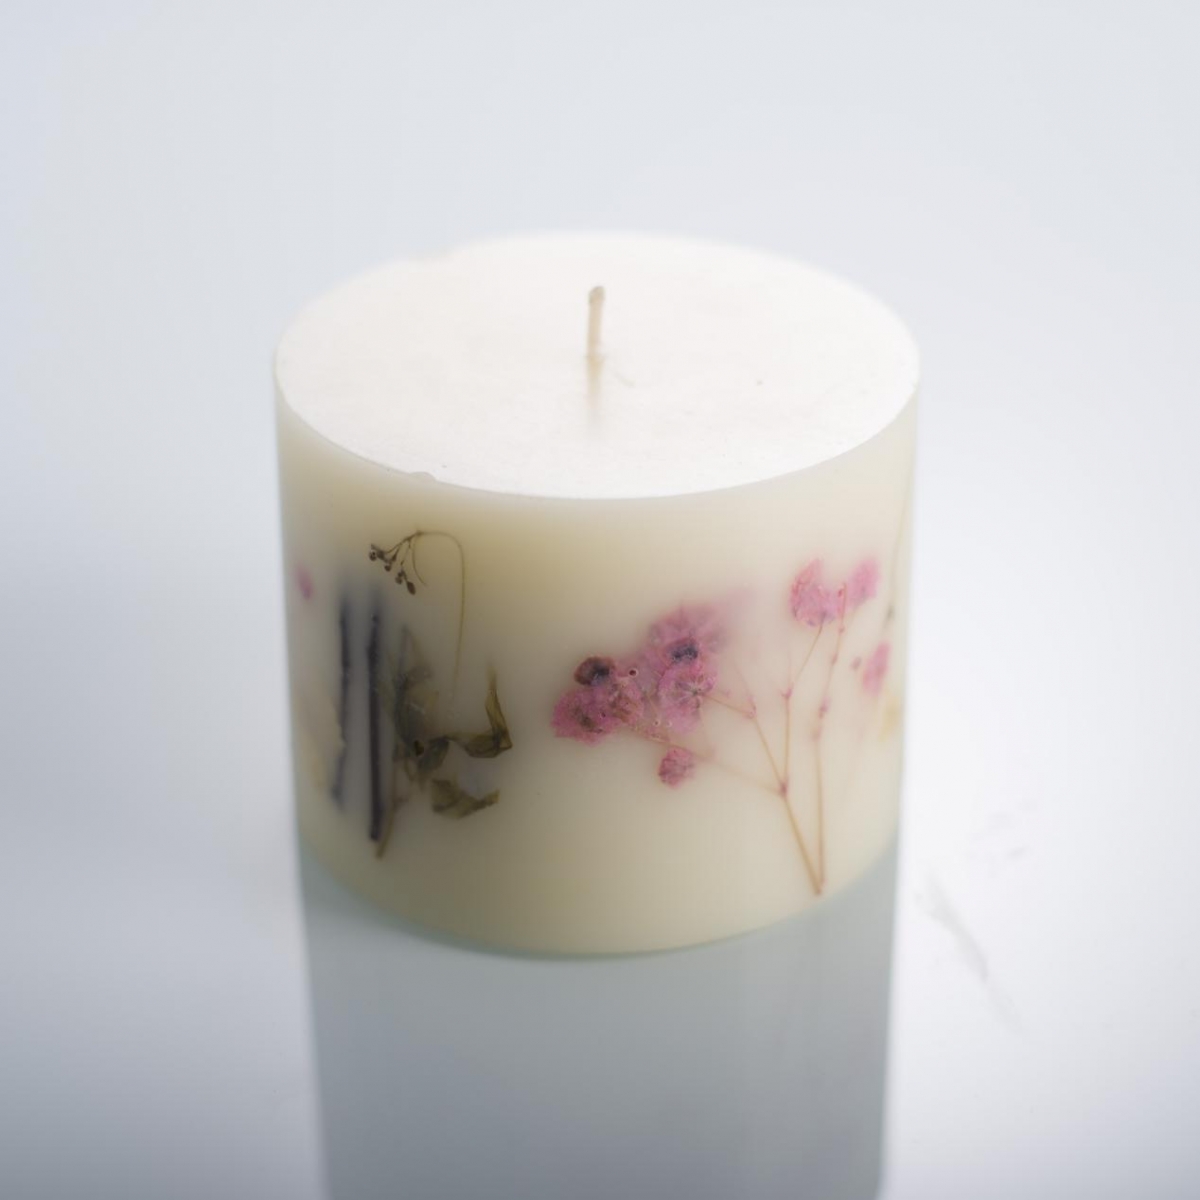 Dried Flowers Candles：Natural Soy Wax, Plum Blossom, Yellow Rose, Forsythia, Milan, Scented Pillar Candles,Strong Fragranced ,China Factory ,Best Price-HOWCANDLE-Candles,Scented Candles,Aromatherapy Candles,Soy Candles,Vegan Candles,Jar Candles,Pillar Candles,Candle Gift Sets,Essential Oils,Reed Diffuser,Candle Holder,